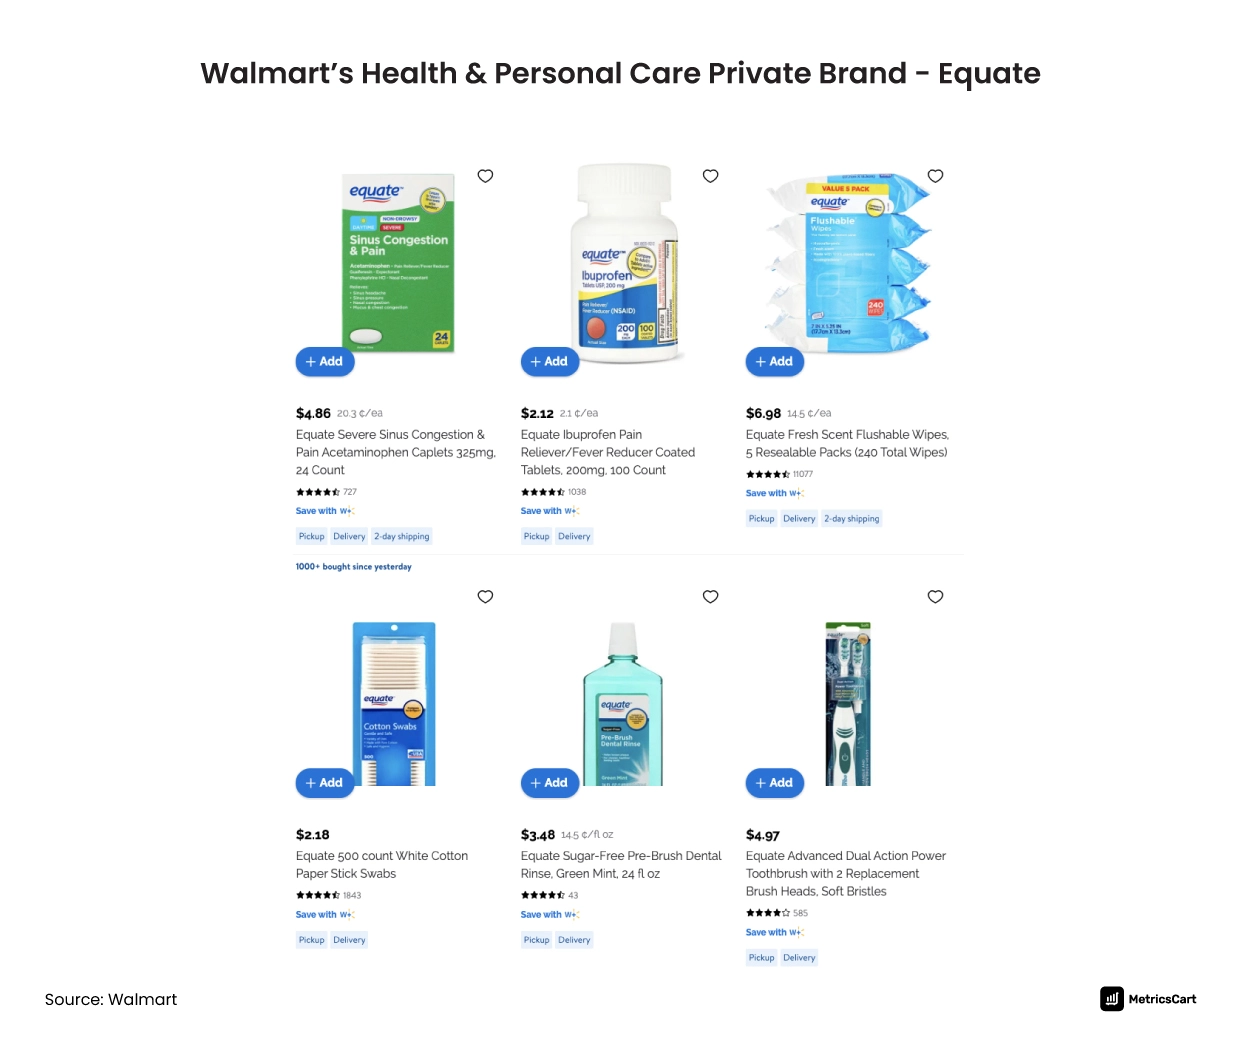 Walmart’s Health and Personal Care Private Brand - Equate